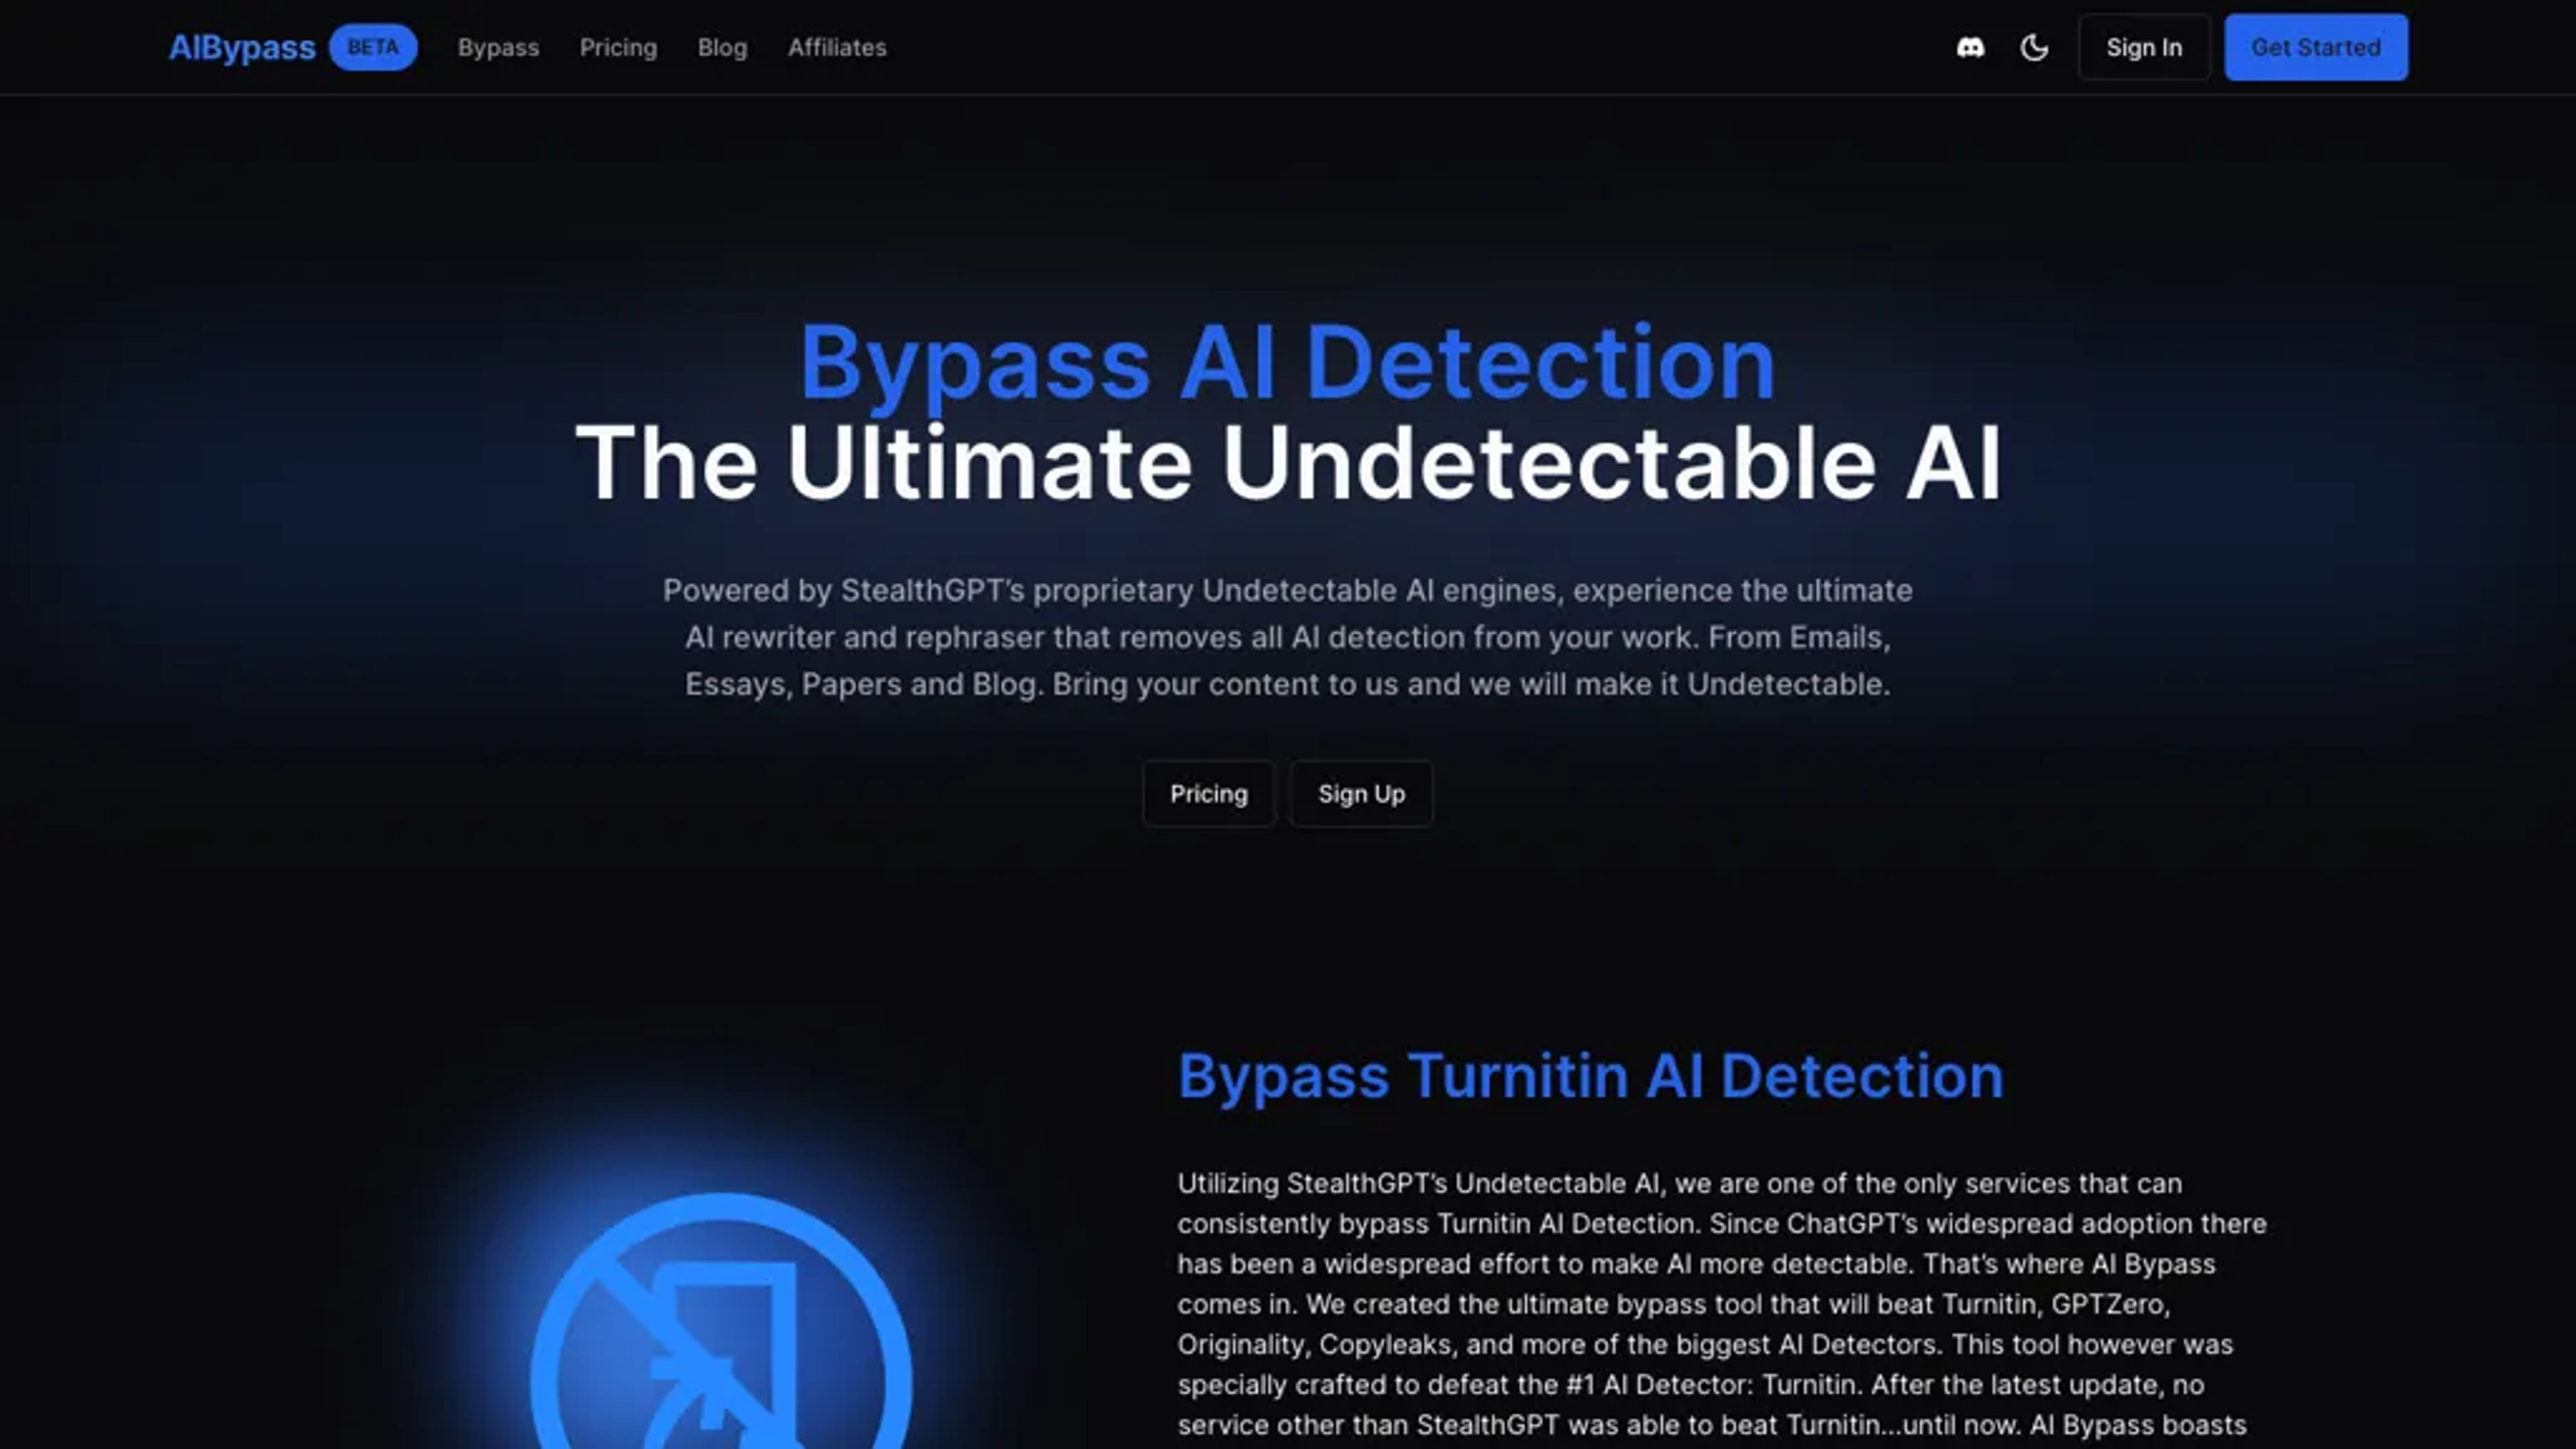 AIBypass